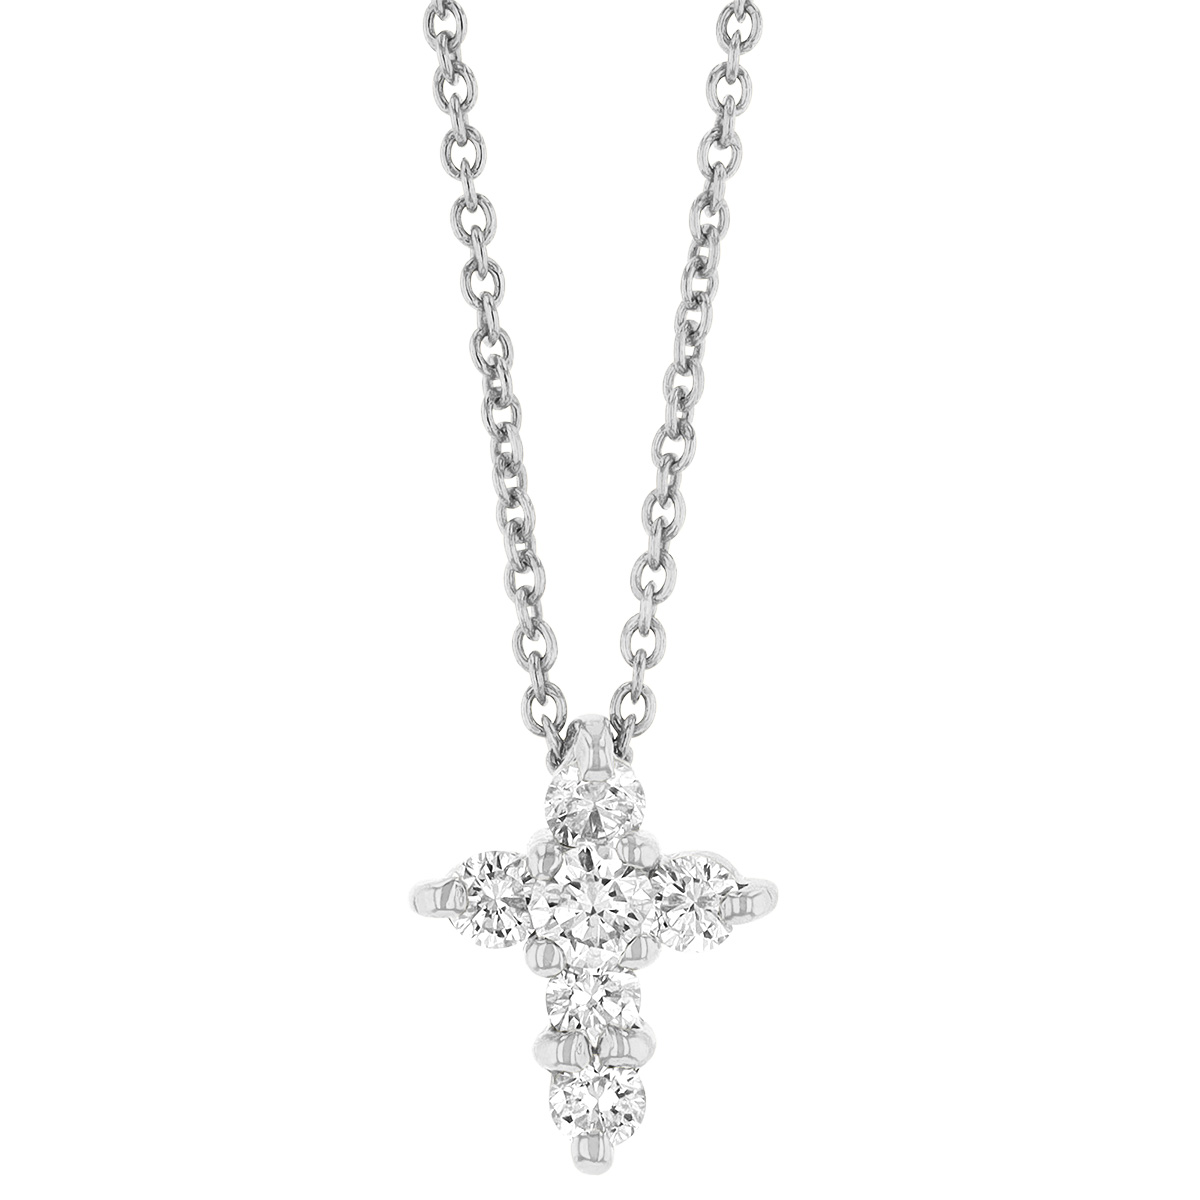 Roberto Coin Tiny Treasures White Gold Baby Cross Necklace with Diamonds, 18